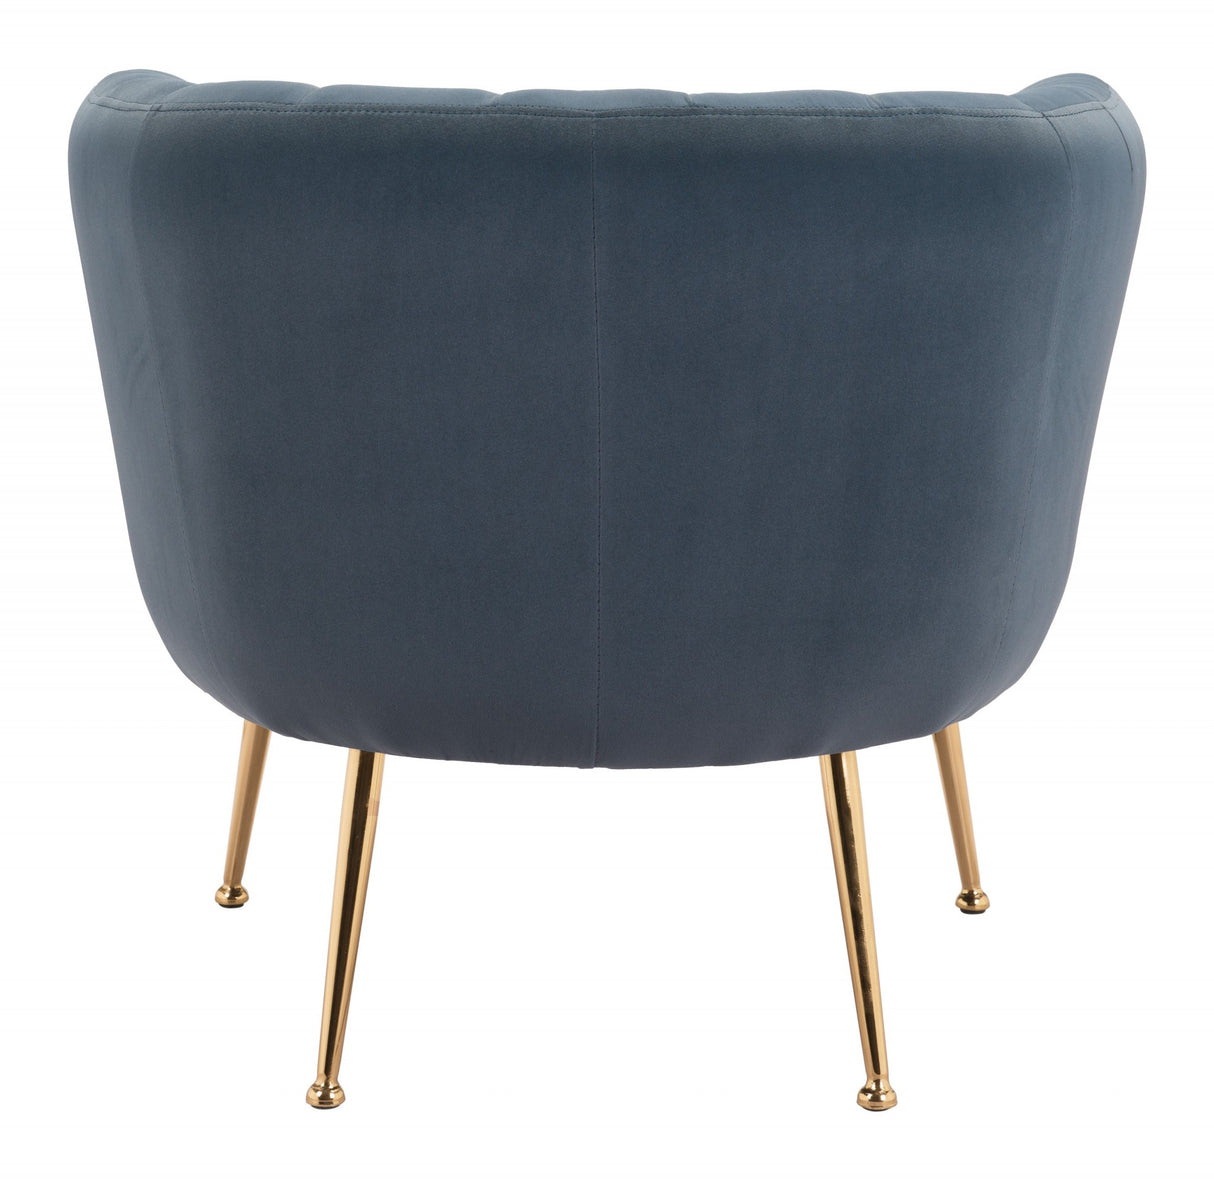 30" Gray And Gold Velvet Tufted Club Chair